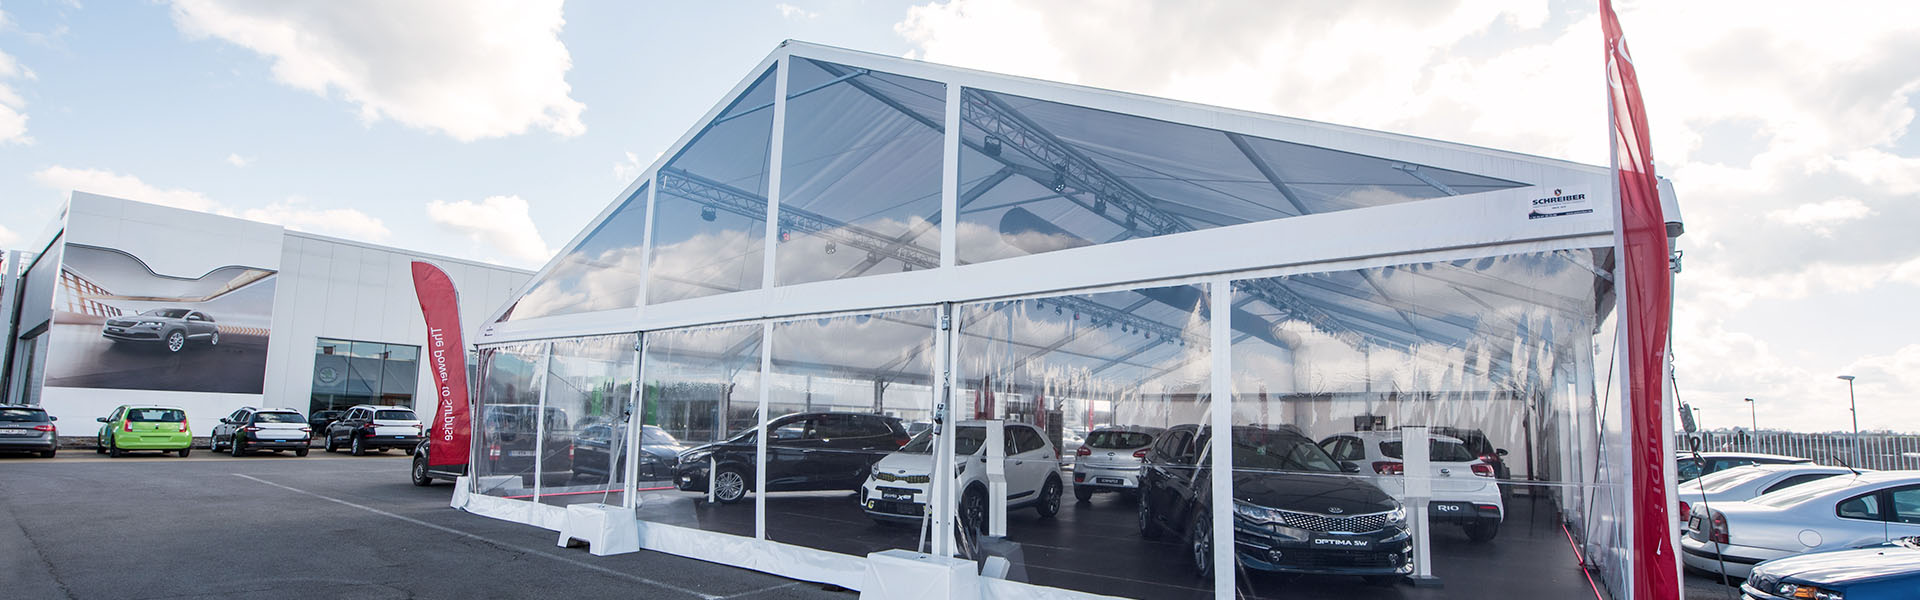 Clearspan marquees